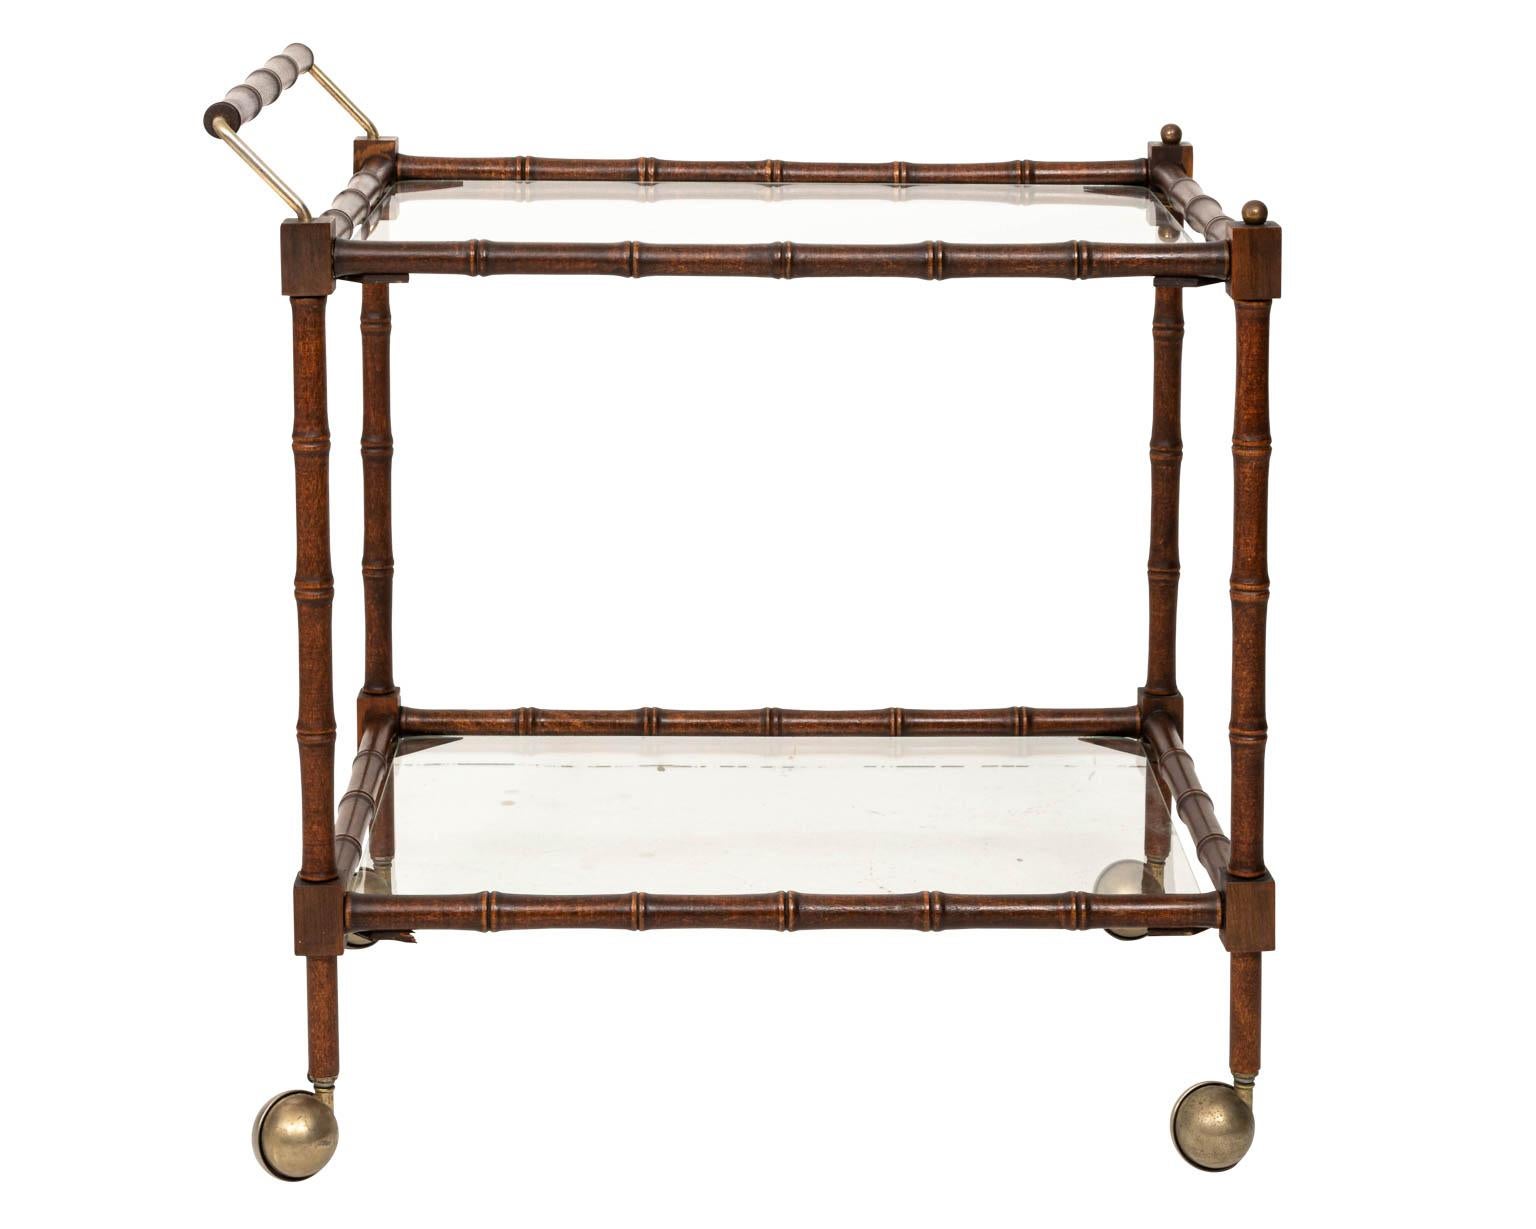 Faux bamboo bar cart, constructed of wood with two glass shelves. Good overall condition with few scratches to glass shelves. Sturdy and ready to use.